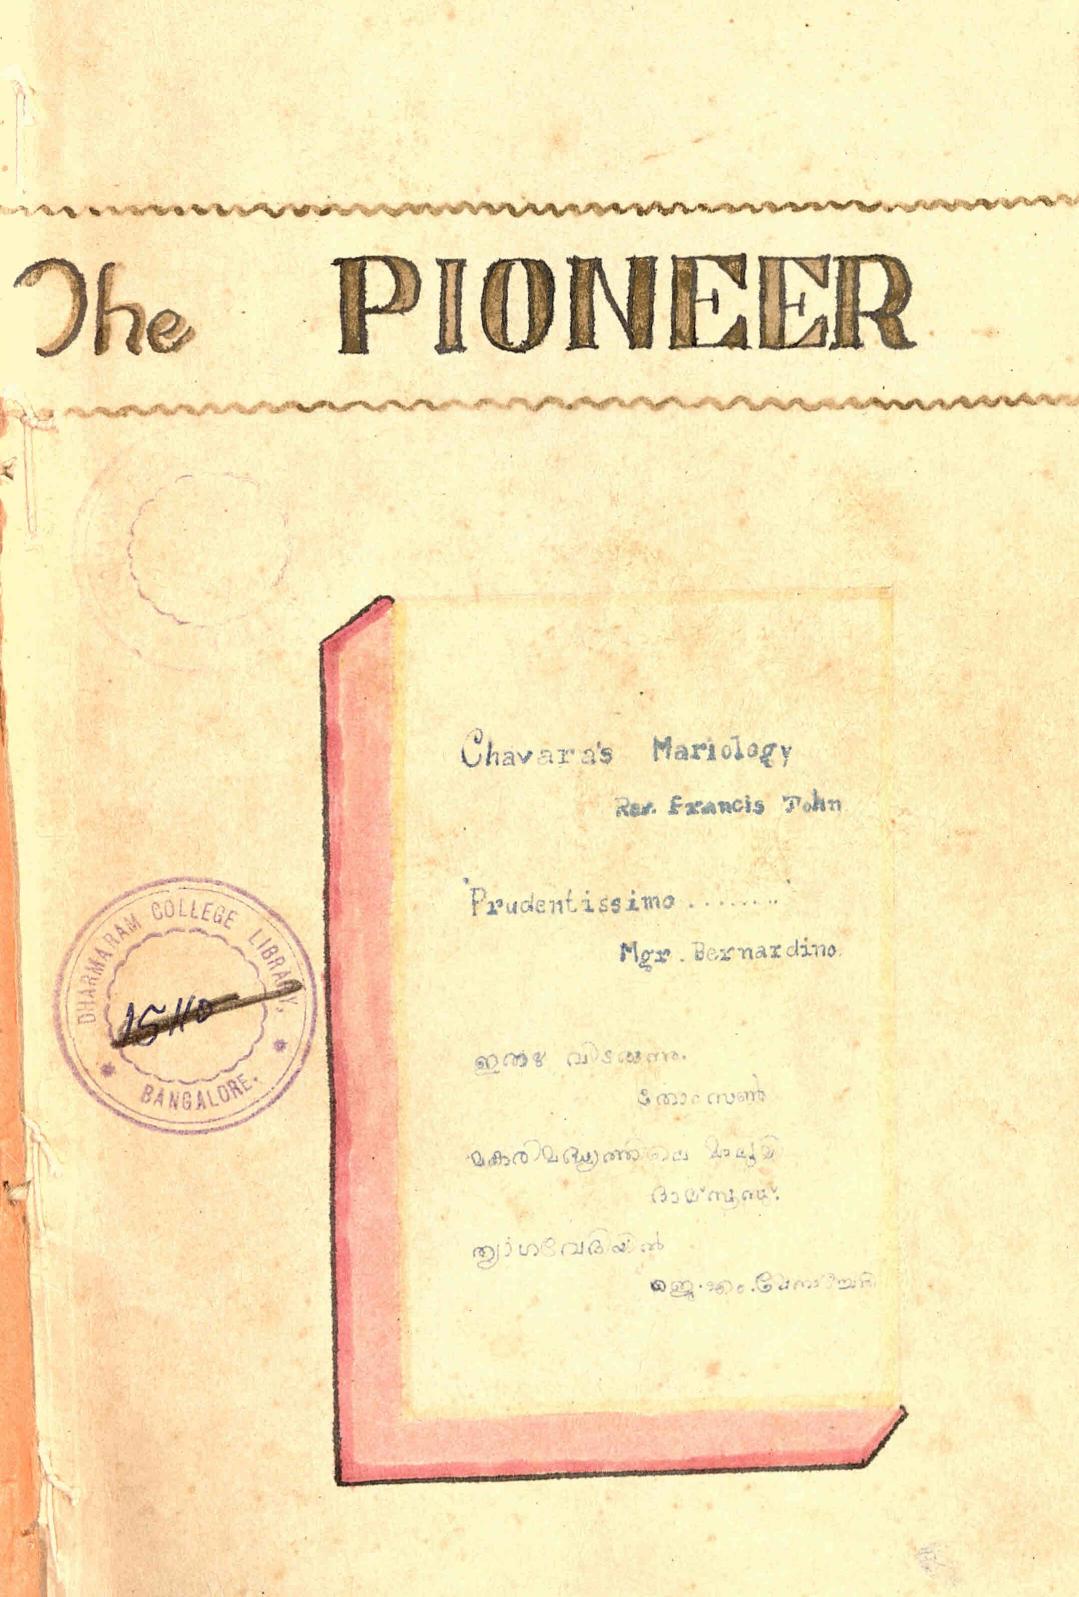 1960 - The Pioneer - Volume 01 - No - 01 and 02